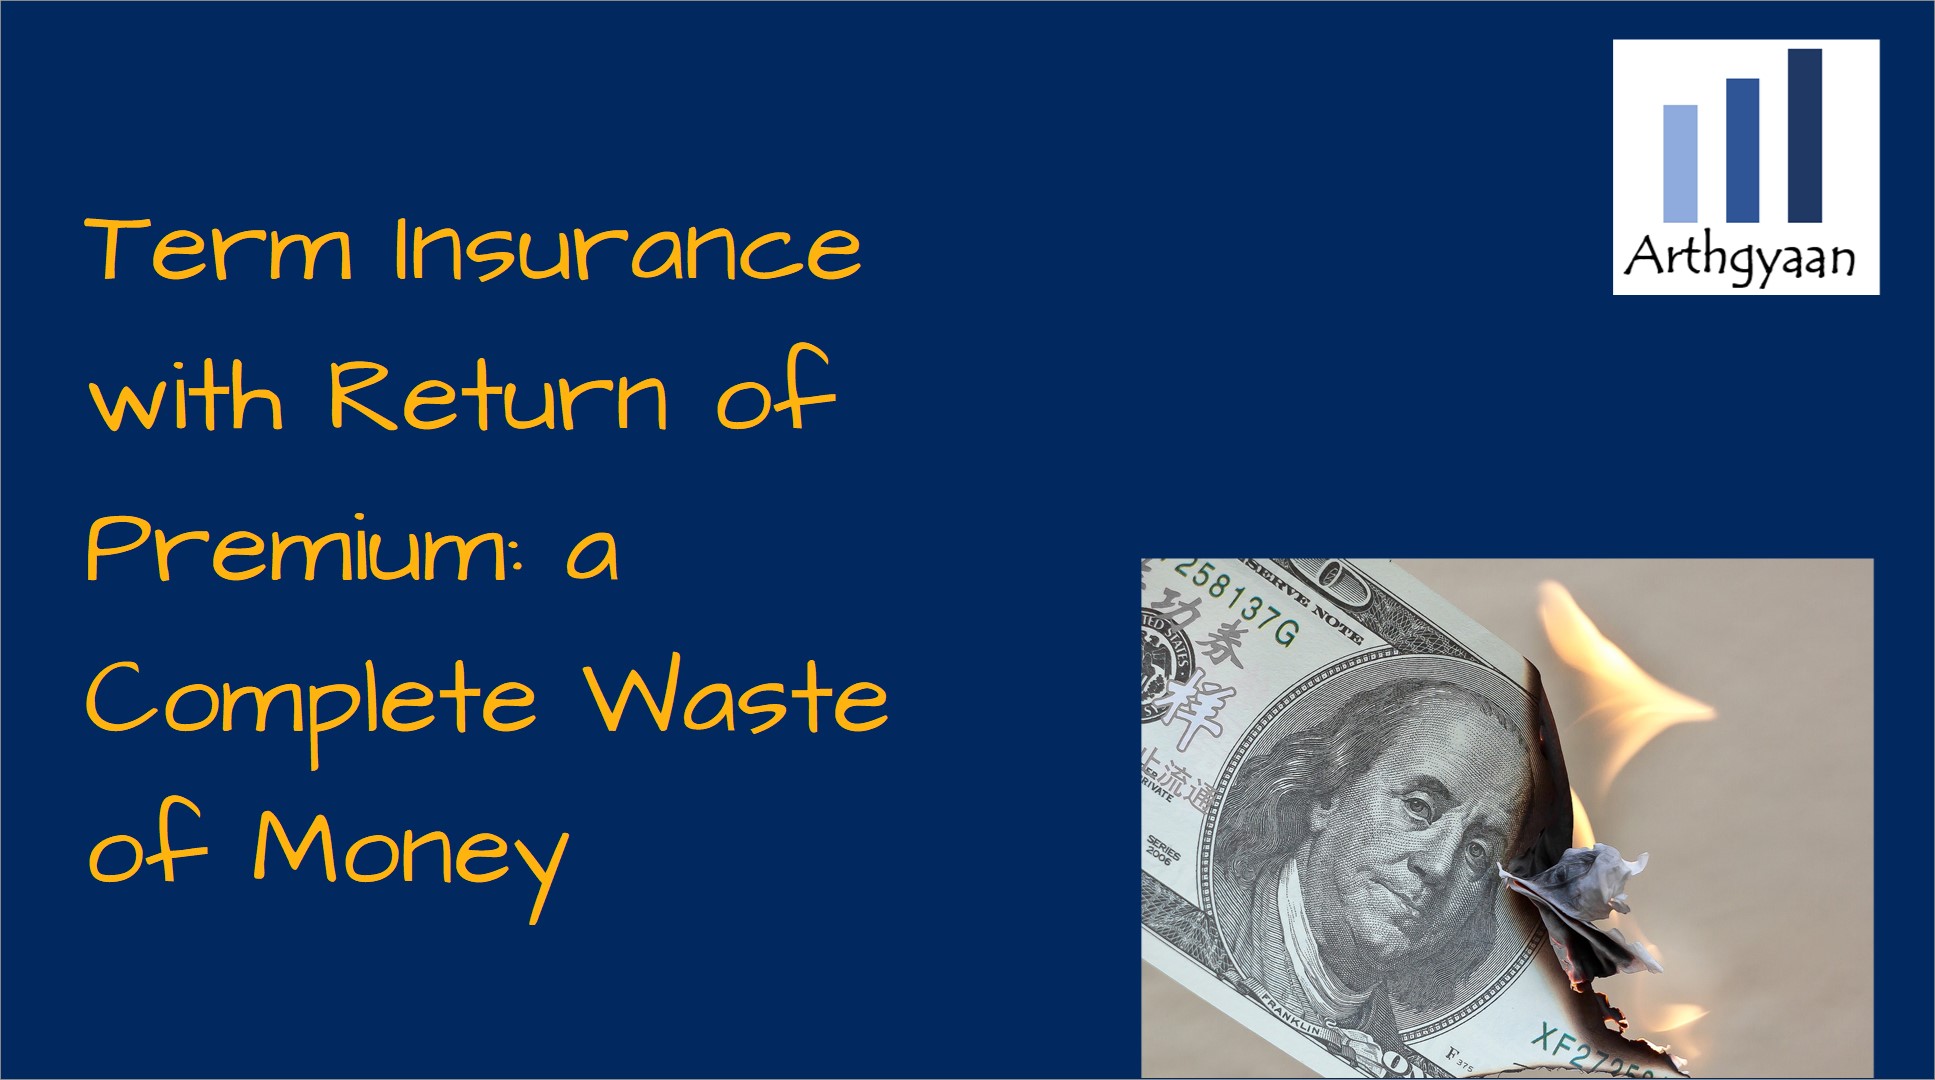 Term Insurance with Return of Premium: a Complete Waste of Money